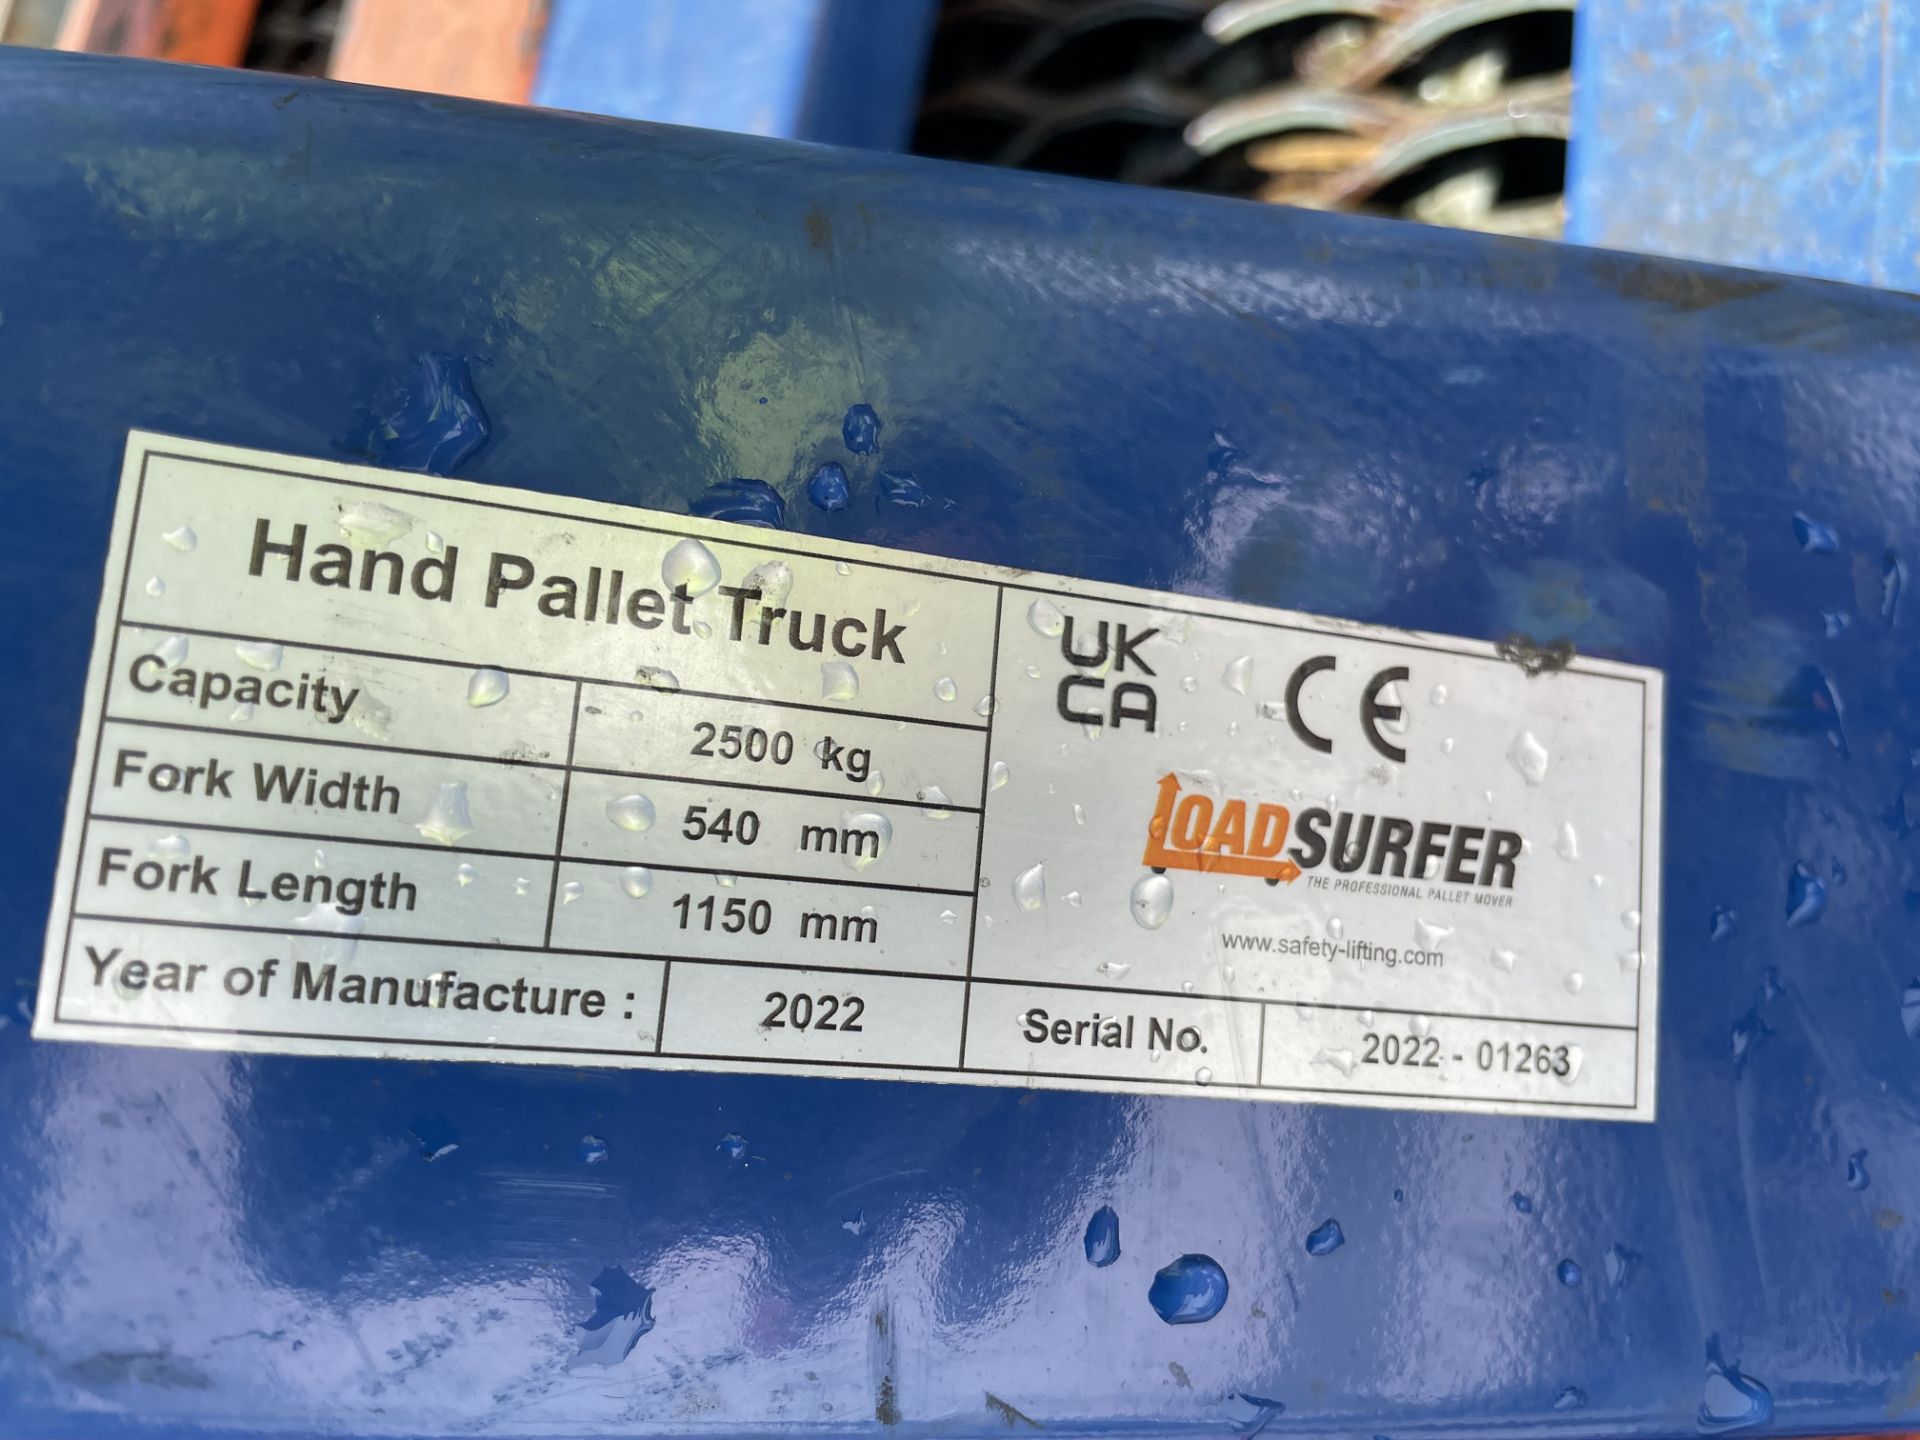 Load Surfer Hand Hydraulic Pallet Truck, 2500kg Capacity (2022) Please read the following - Image 2 of 2